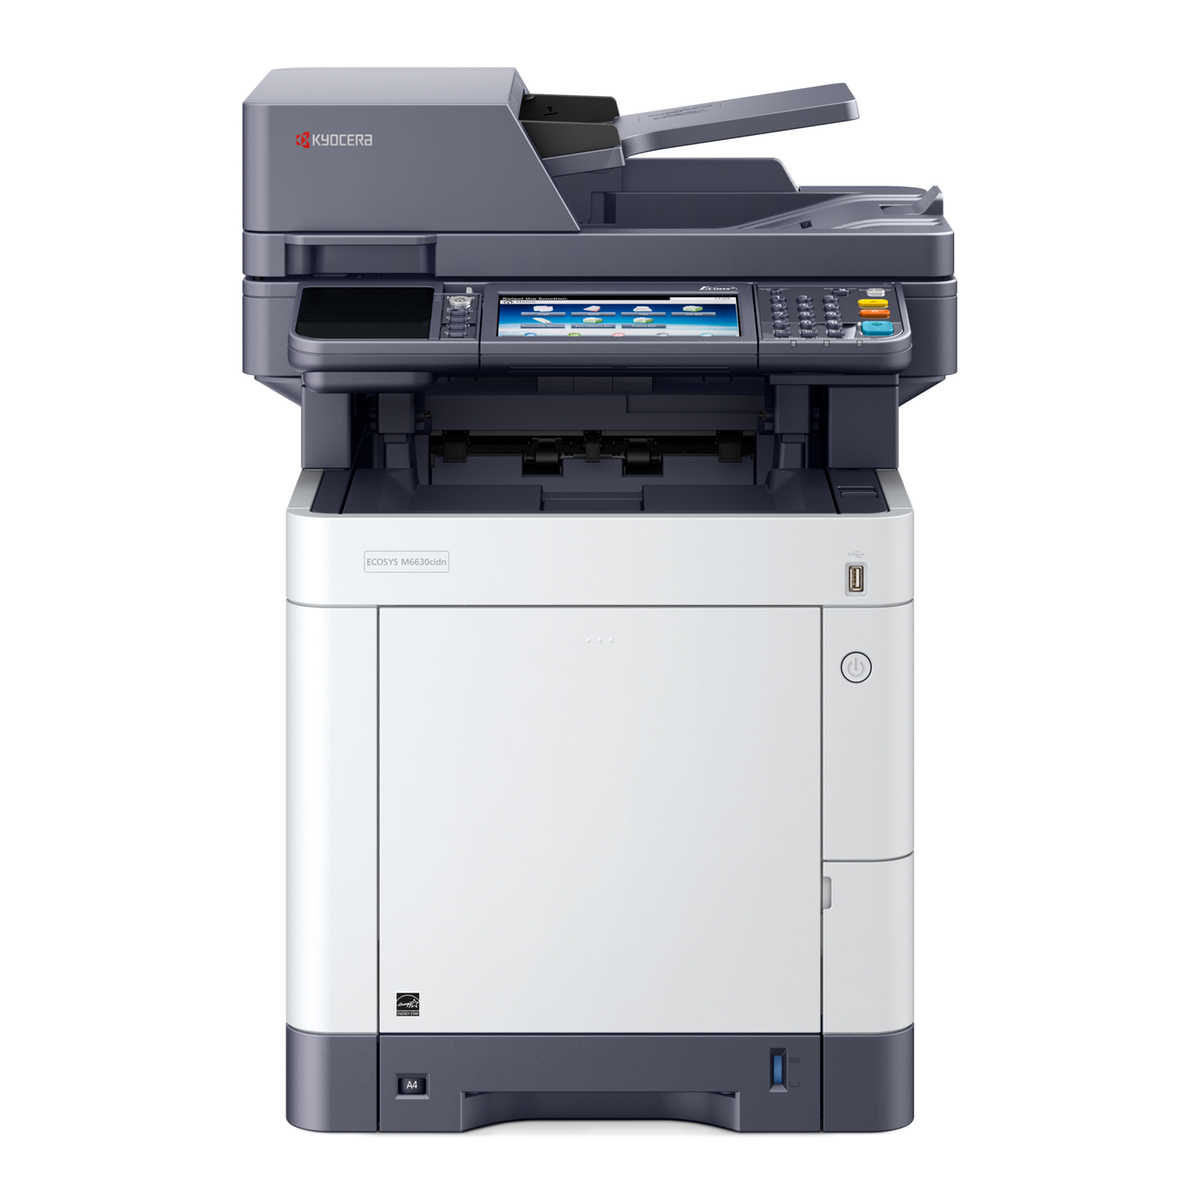 printer and photocopier combined